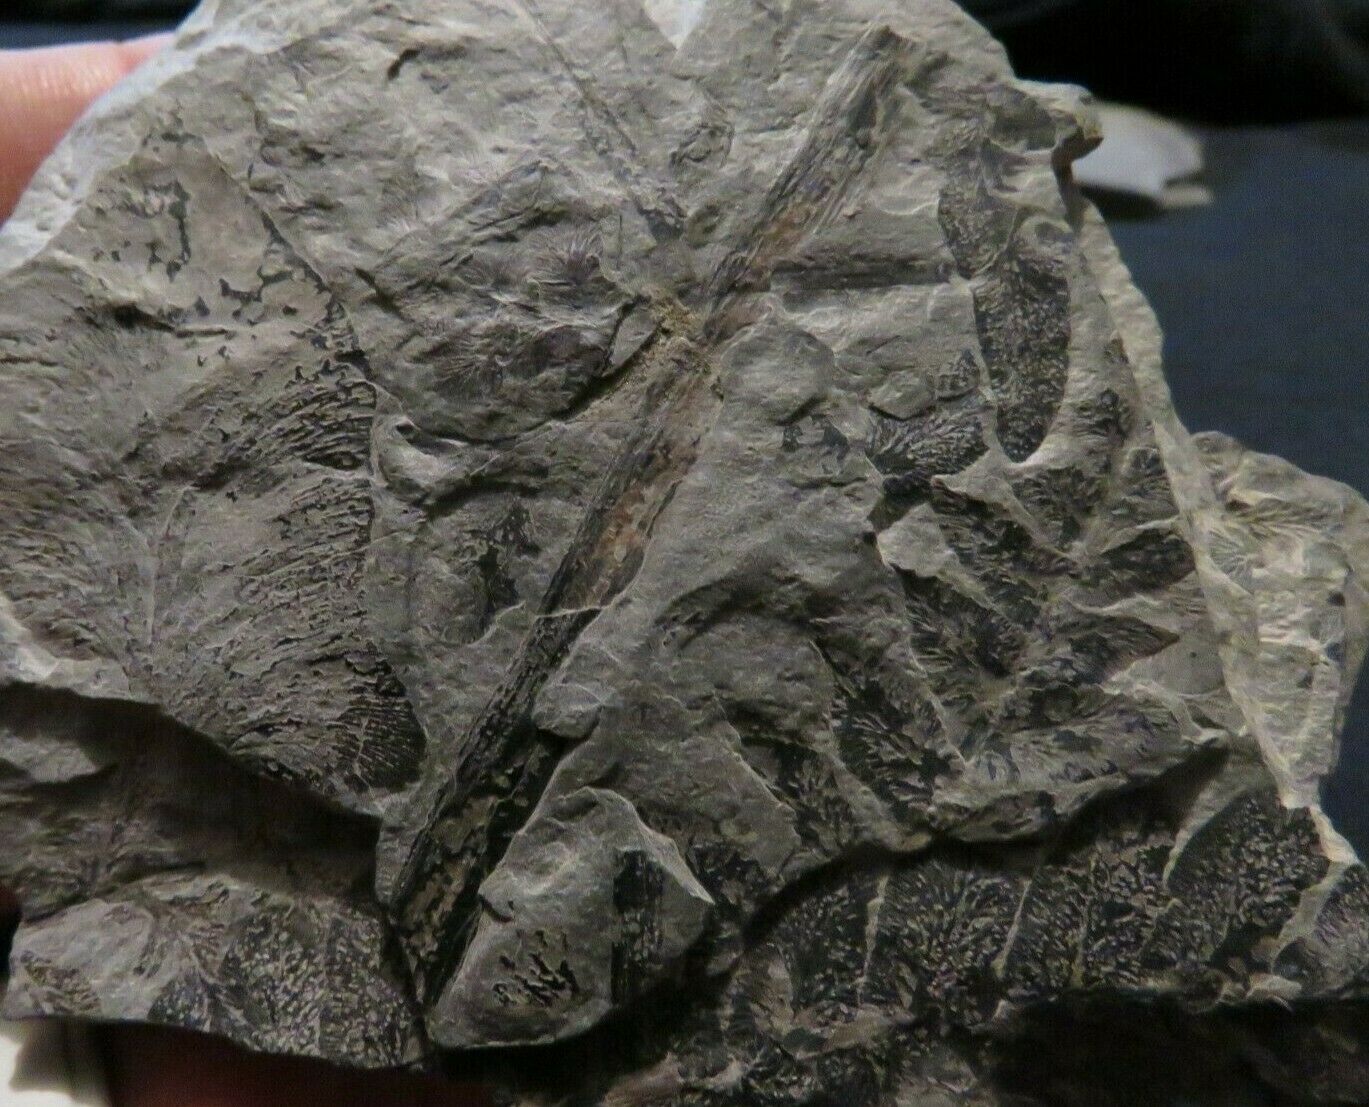 Neuropteris Fern Fossil From The Carboniferous Pennsylvanian Period